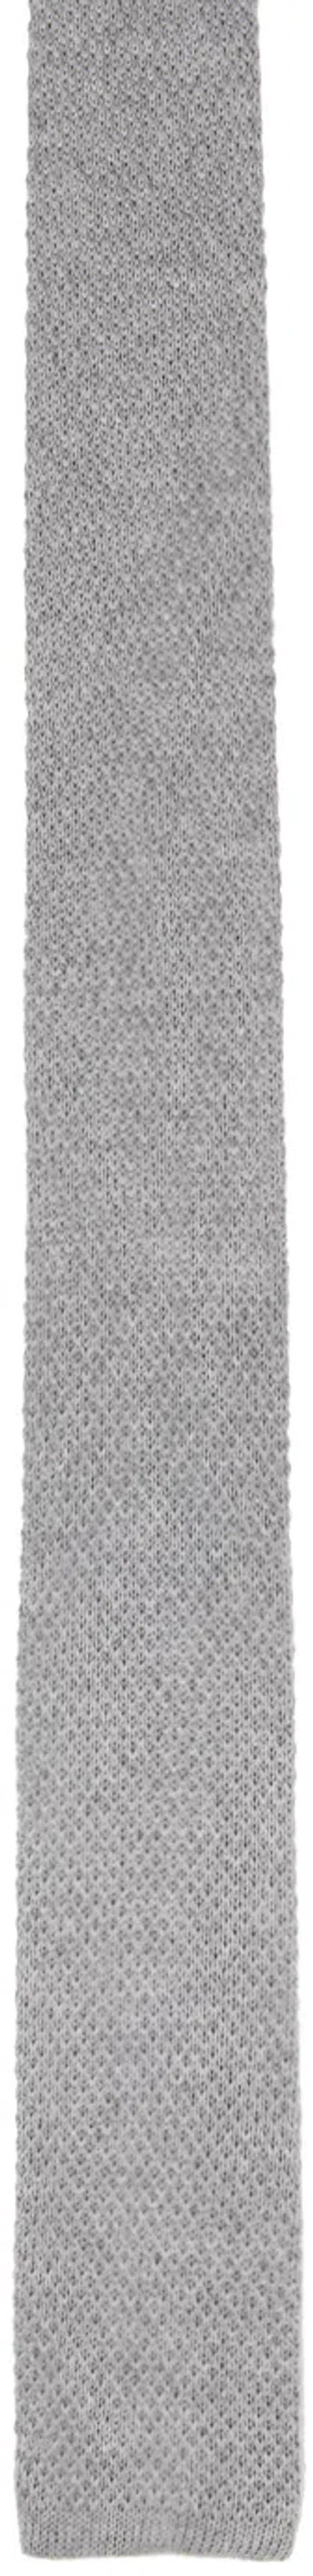 Solid Homme Gray Knit Tie